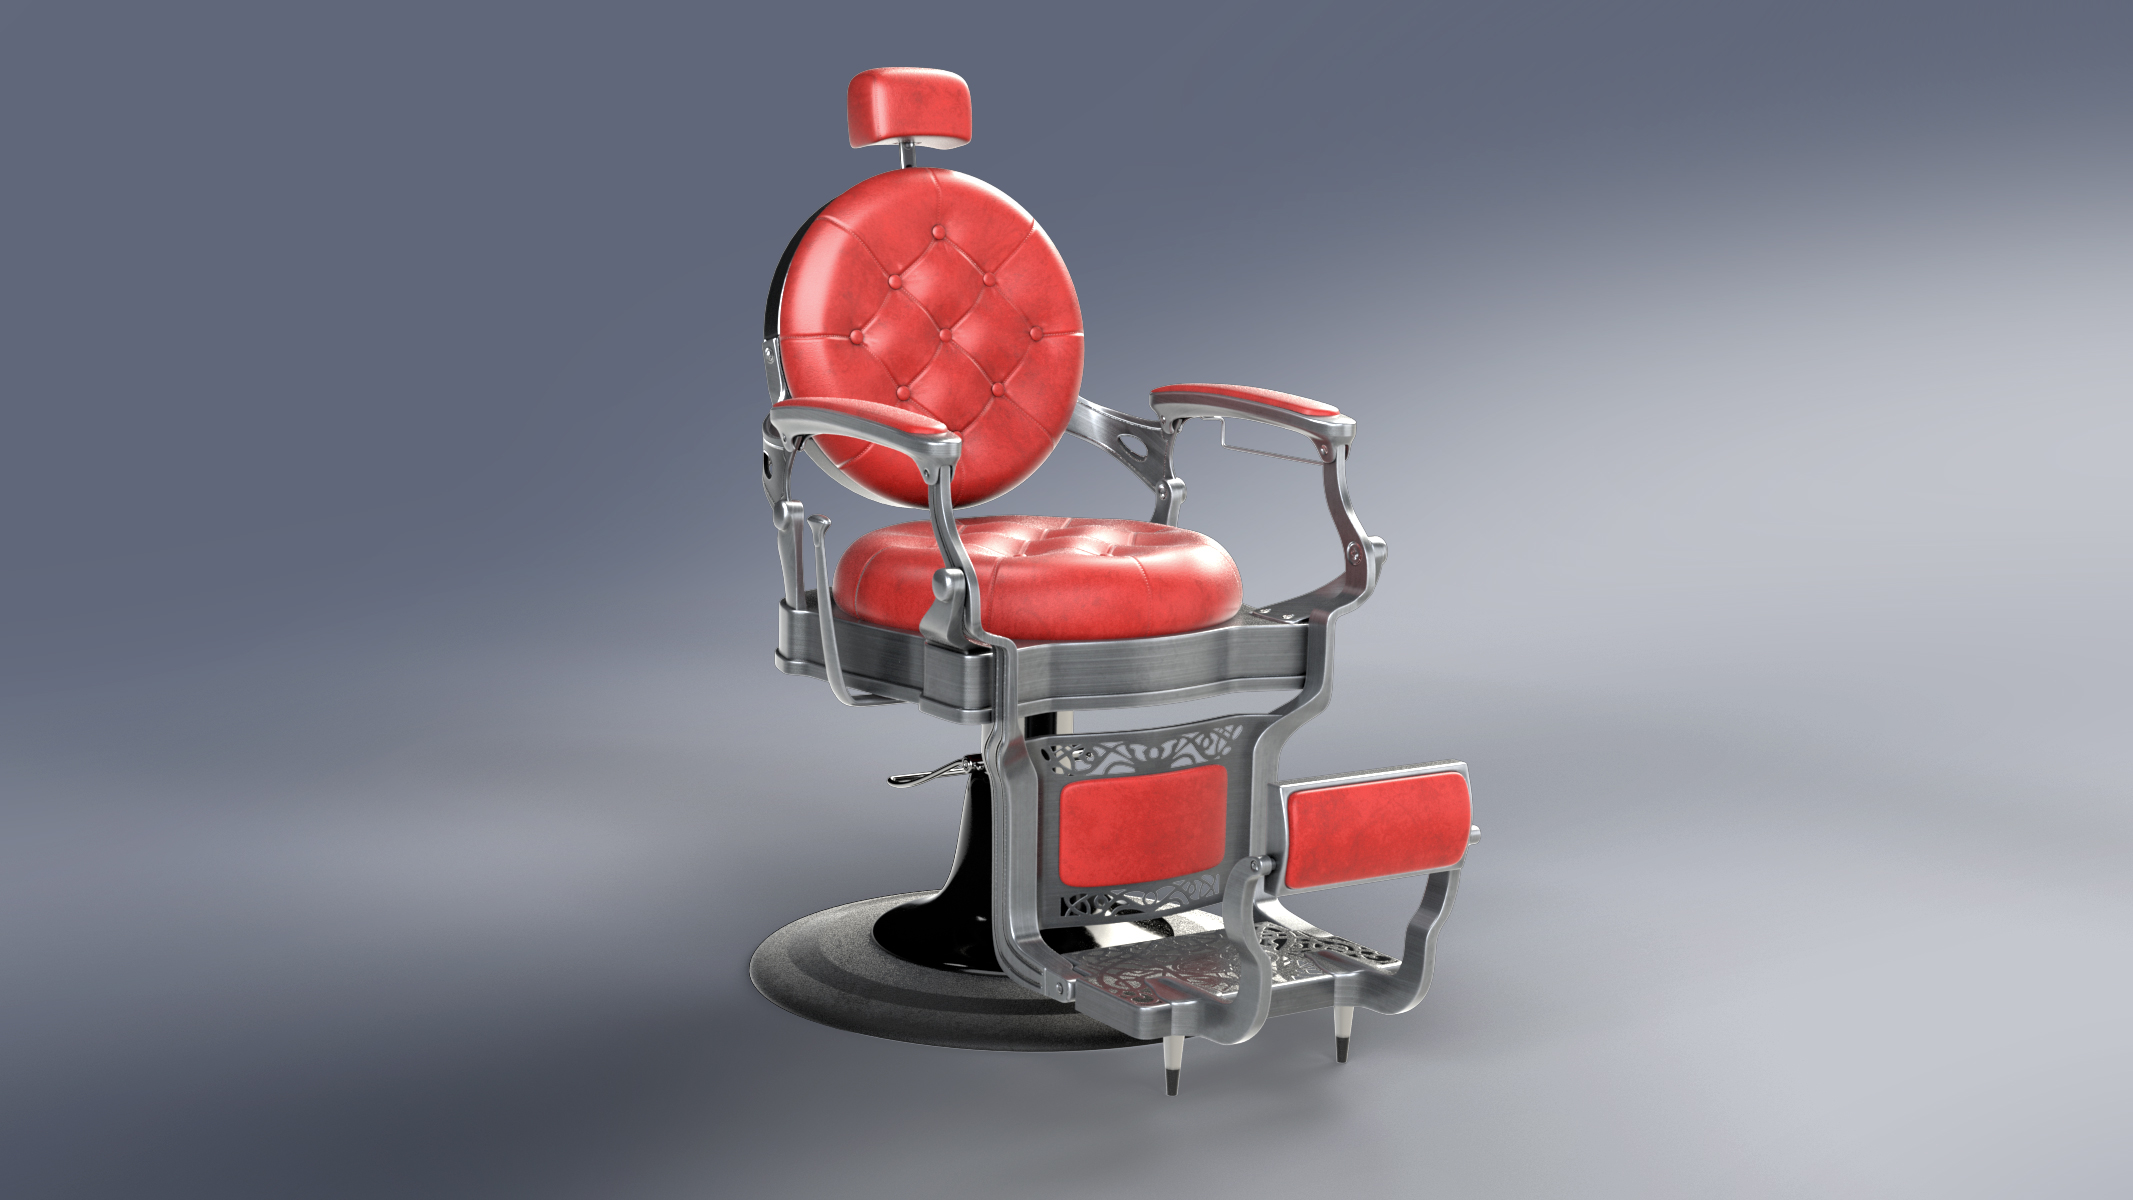 Alesso Professional Barber Chair 3d Turbosquid 1441402